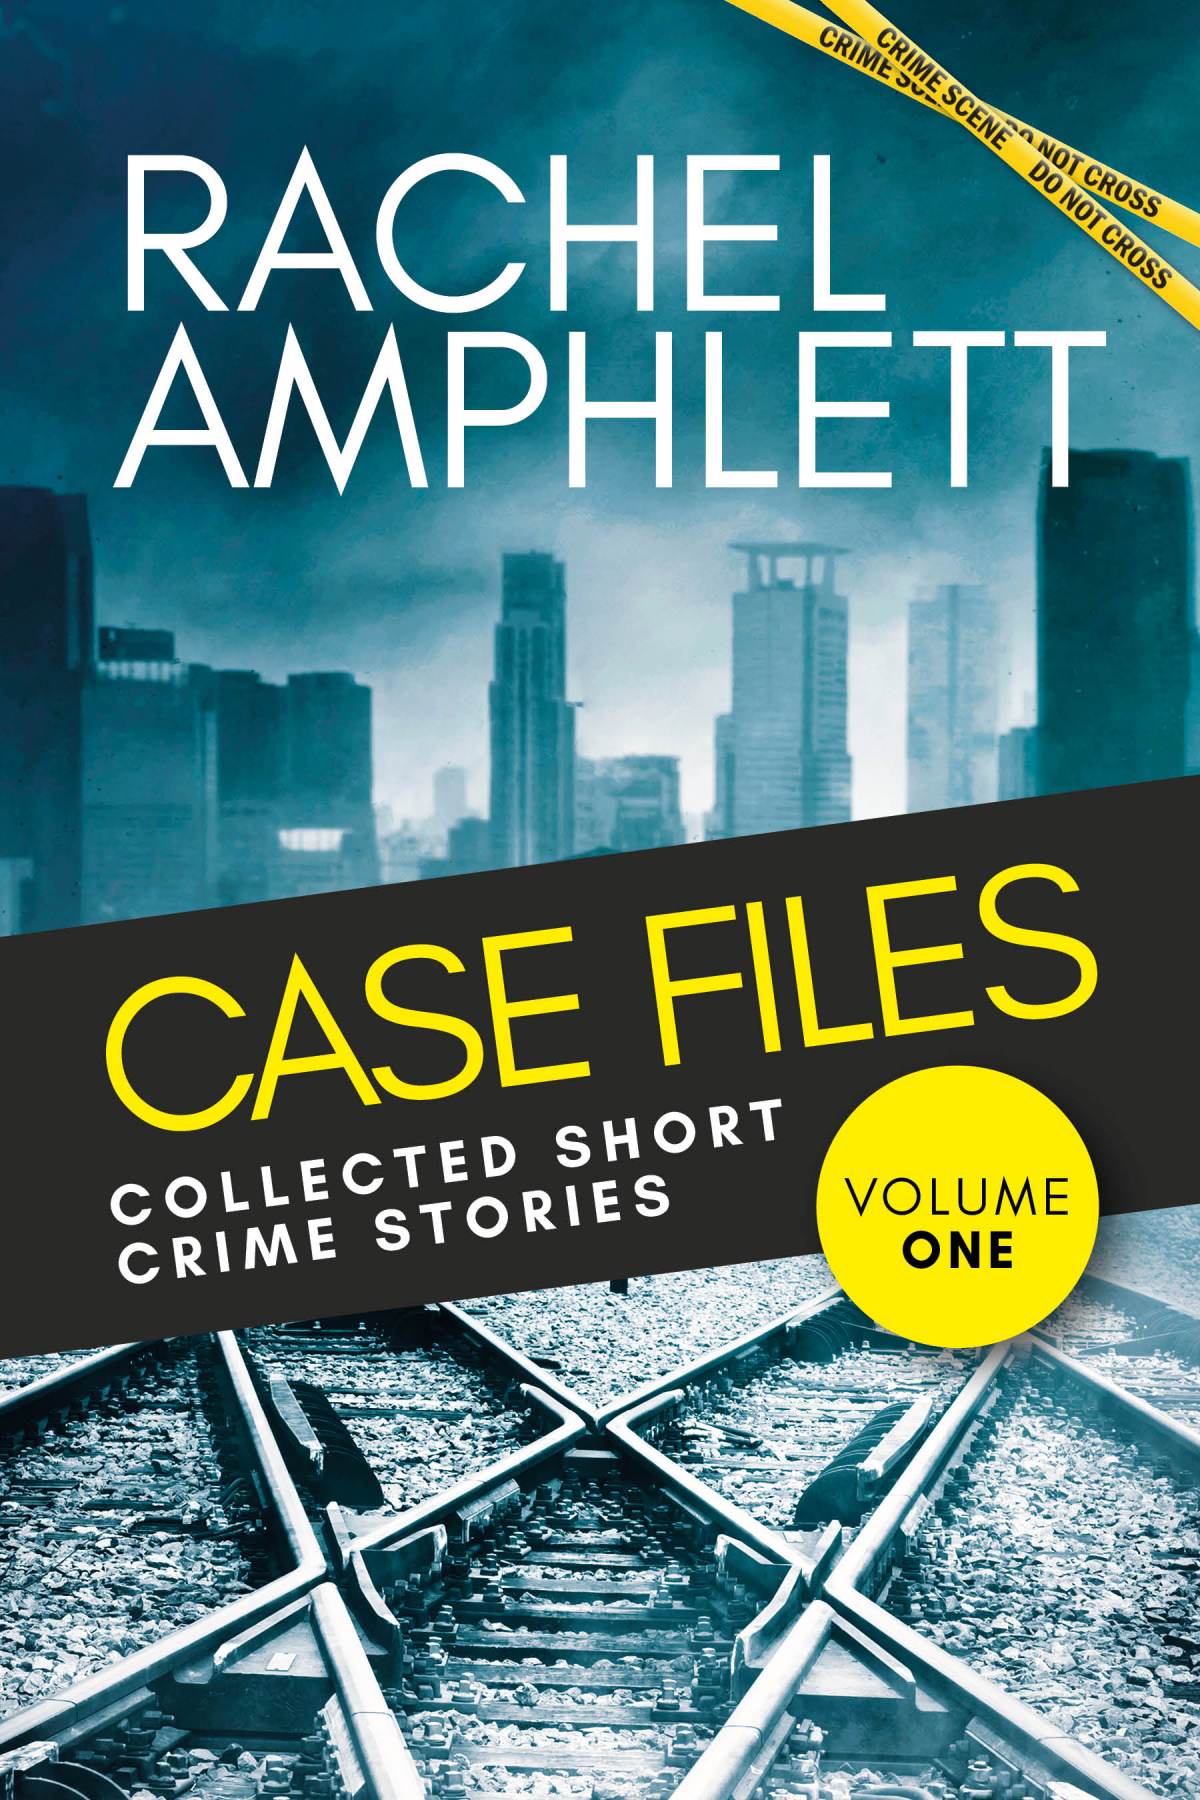 #CaseFiles: Collected Short Crime Stories Vol. 1 by Rachel Amphlett @RandomTTours #BookReview #ShortStoryCollection